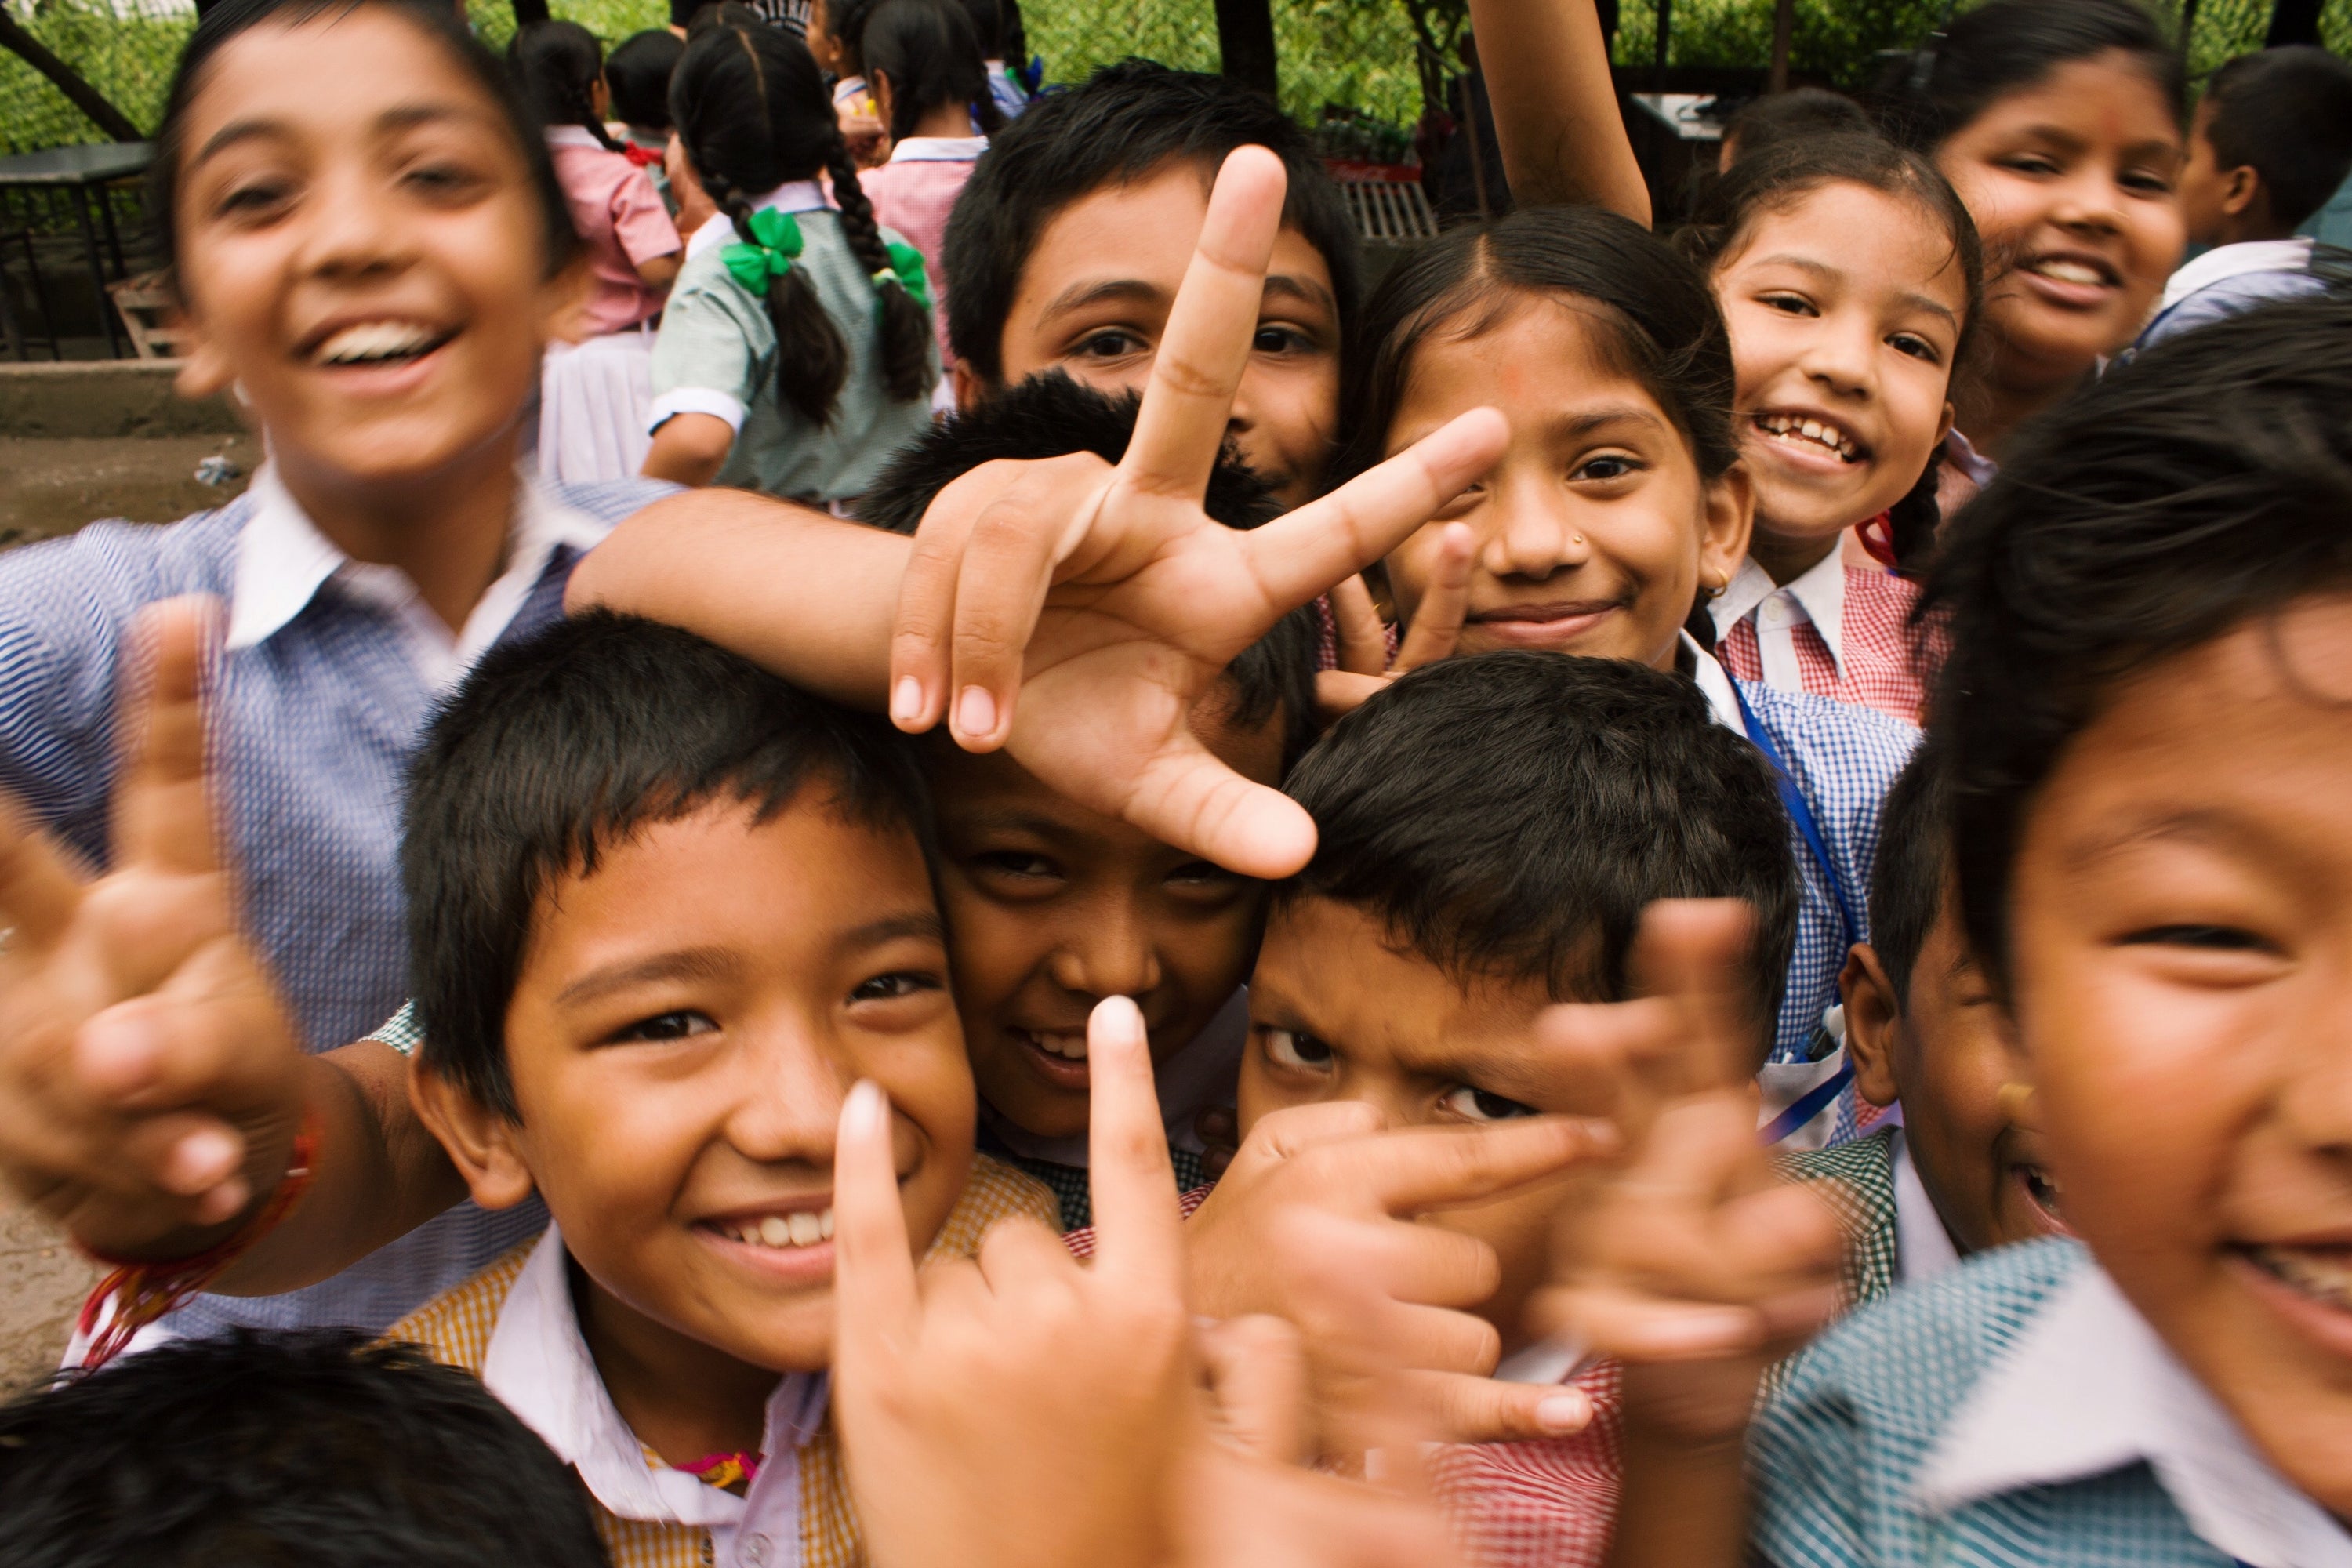 watches for life donation program to help children in Asia